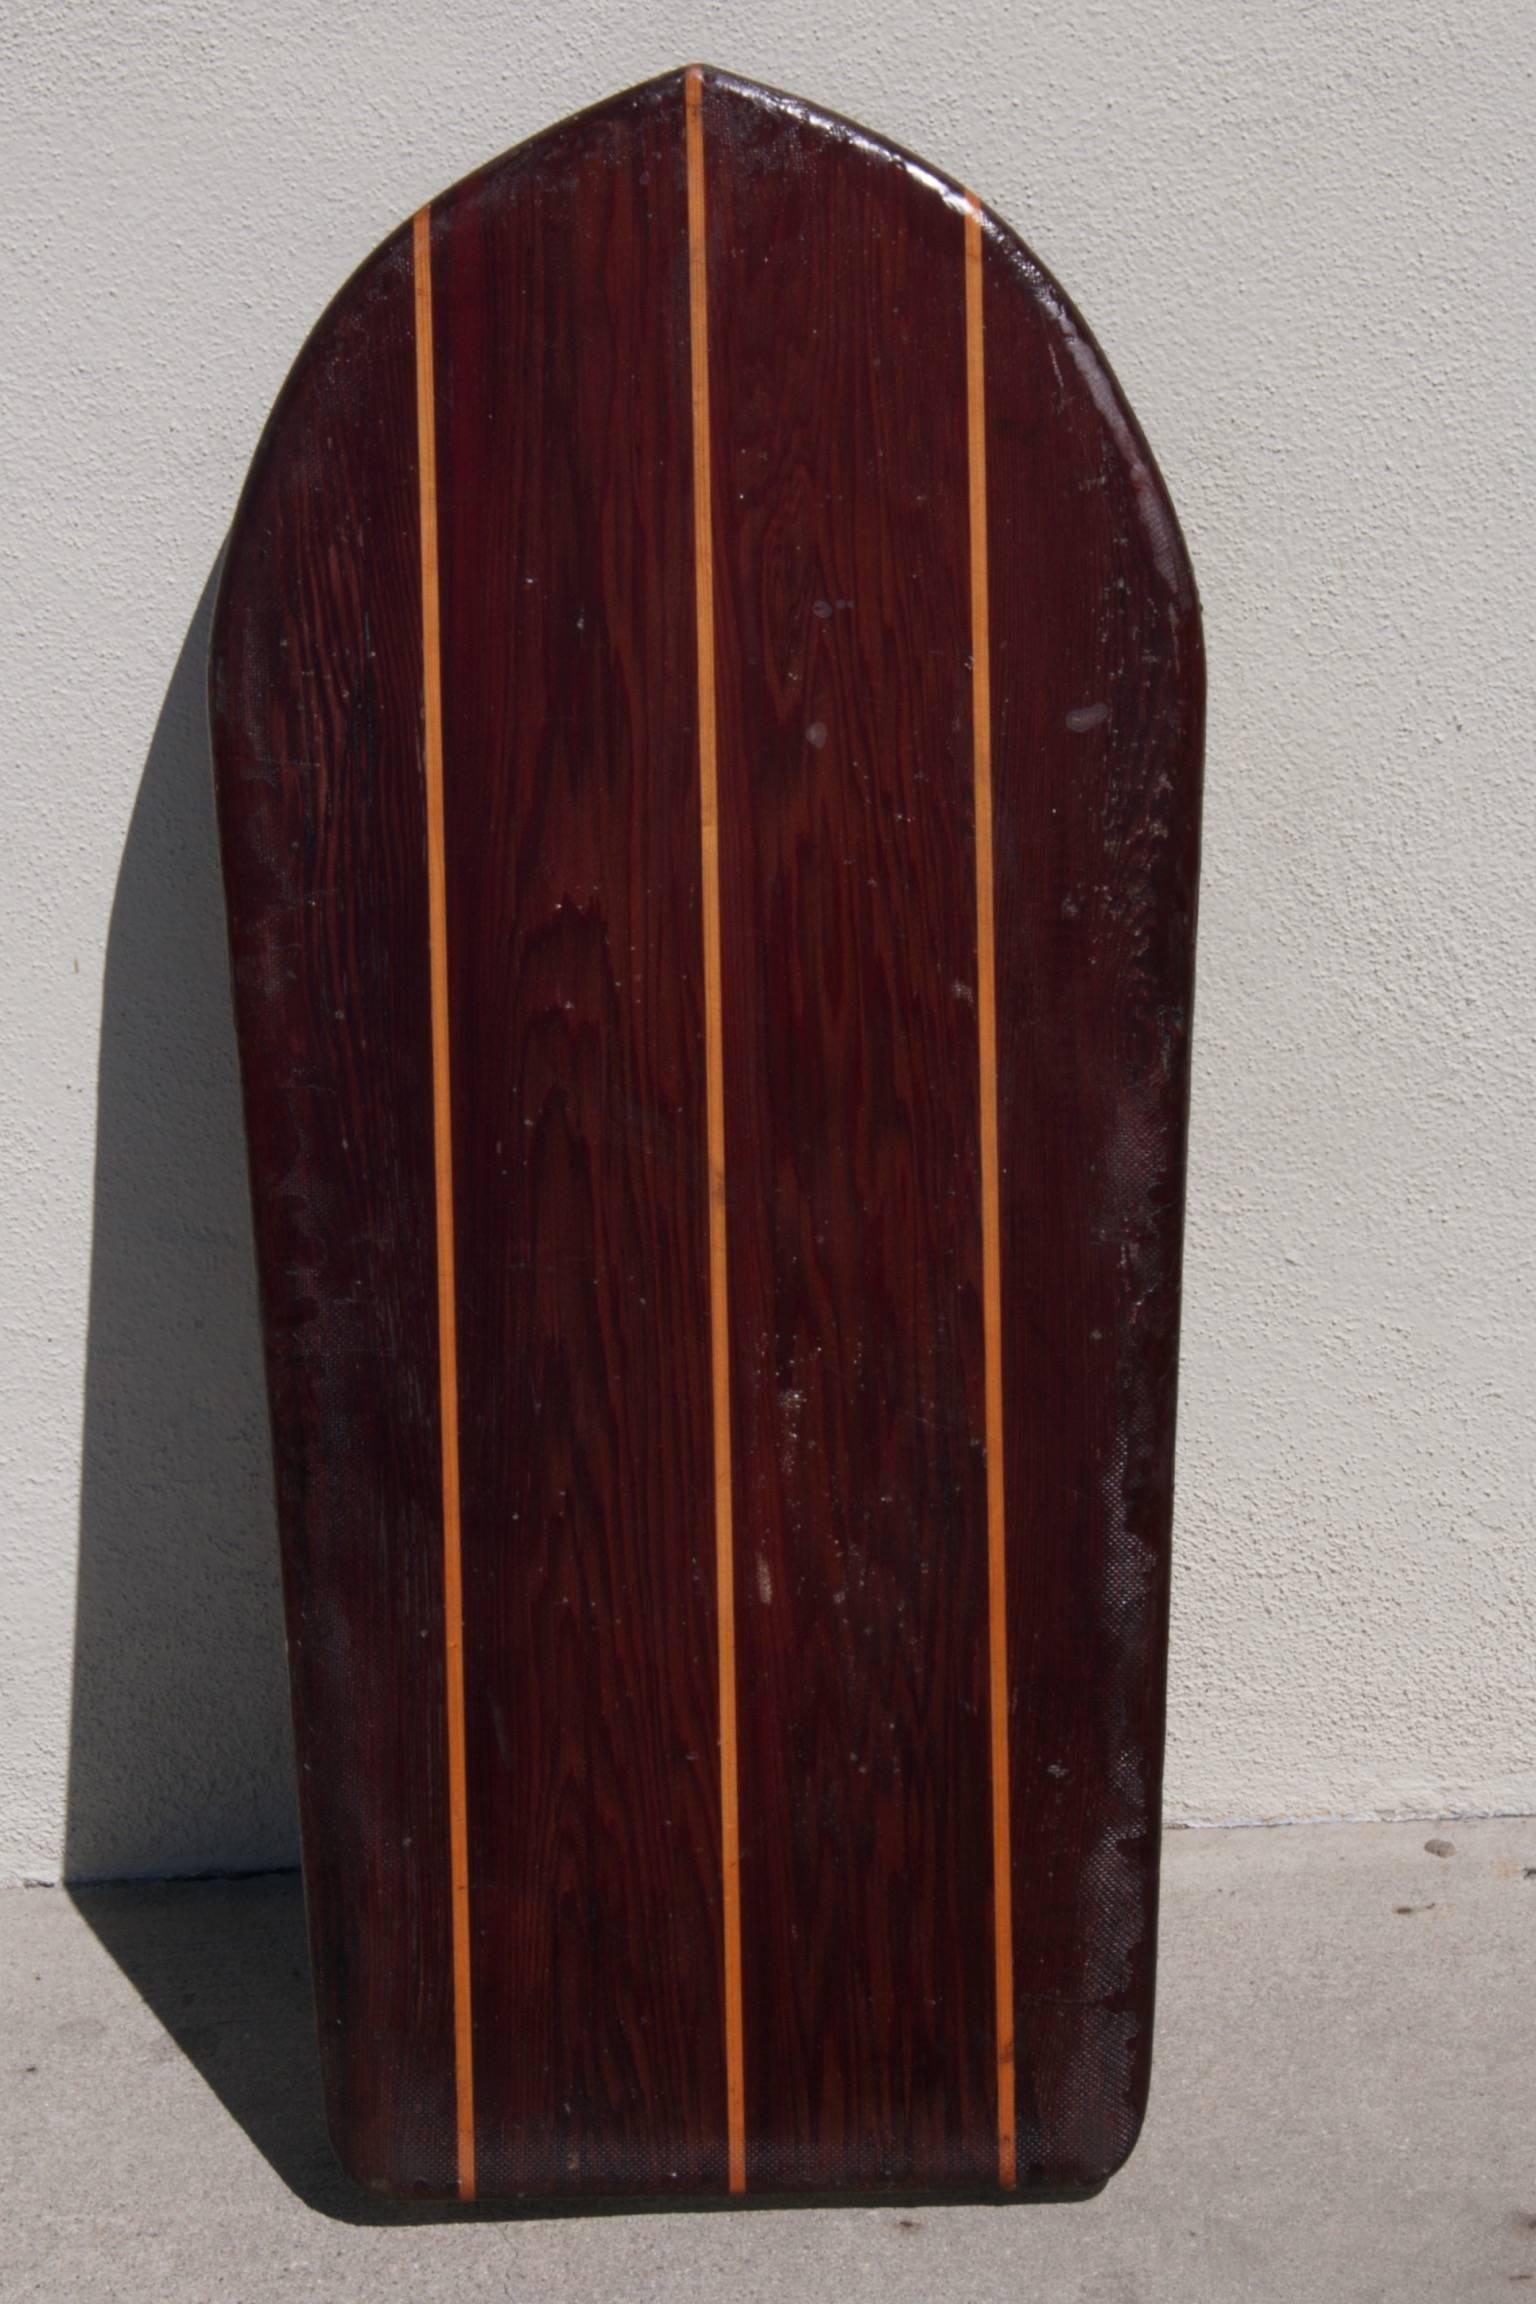 Redwood Twin-fin belly board with Hardwood Stingers, circa 1950.
Dark redwood accented by stripes of light wood stingers captures the eye. Classic shape featuring unique concave bottom and twin fins captures the imagination. Authentic wear